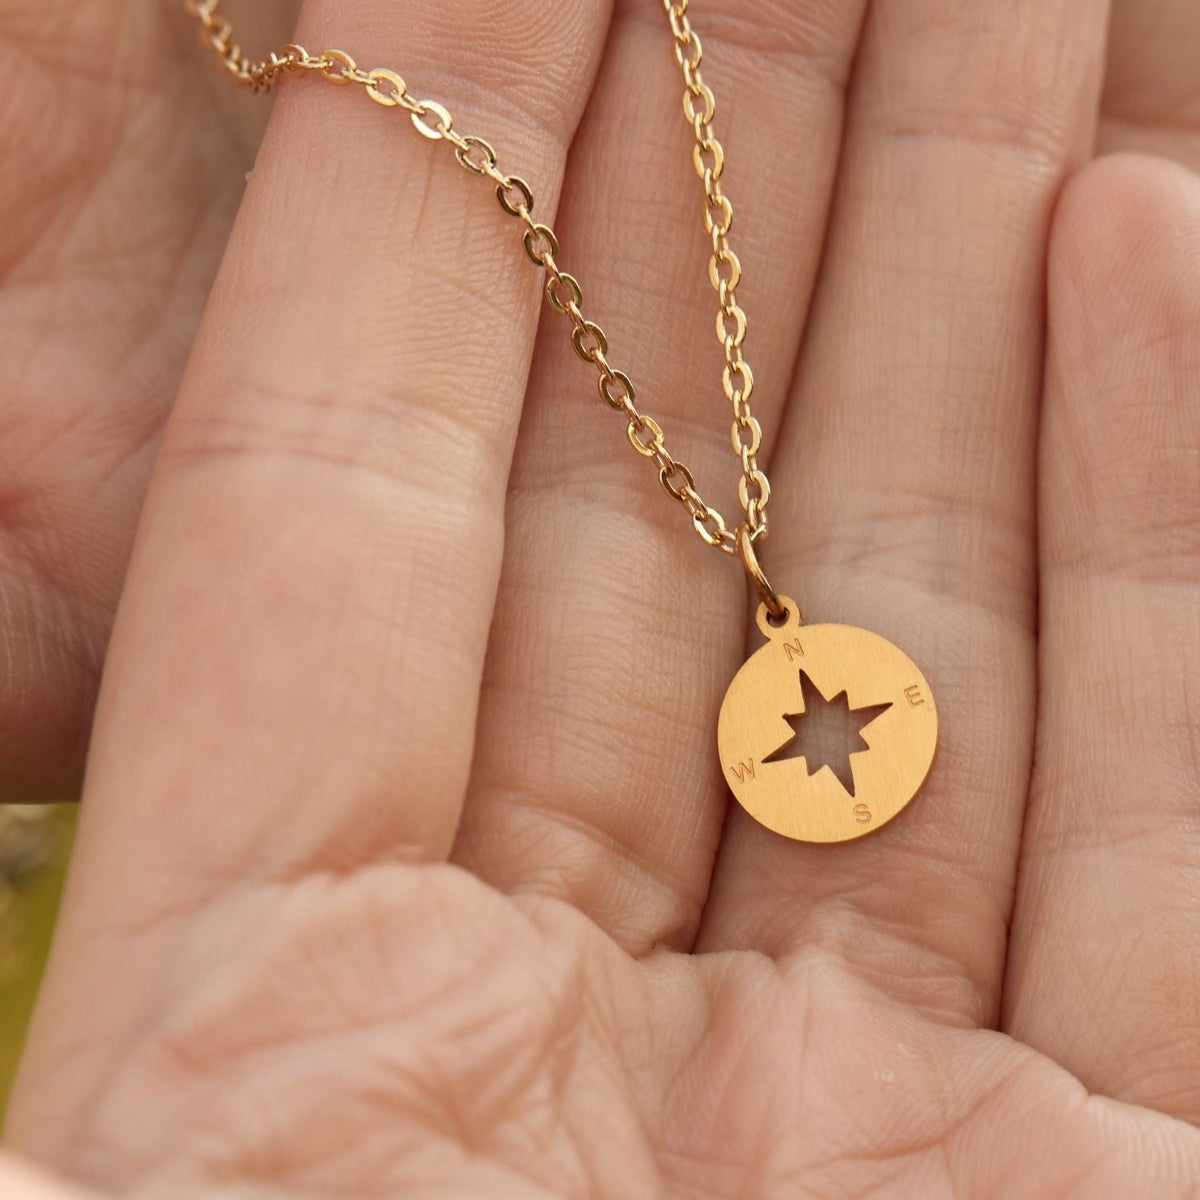 Necklace for Women Men Girls Sun Crescent Moon Star Adjustable Thin Chain Pendant  Necklace Friendship Relationship Statement Couple Sister Christmas  Thanksgiving Gifts - Walmart.com